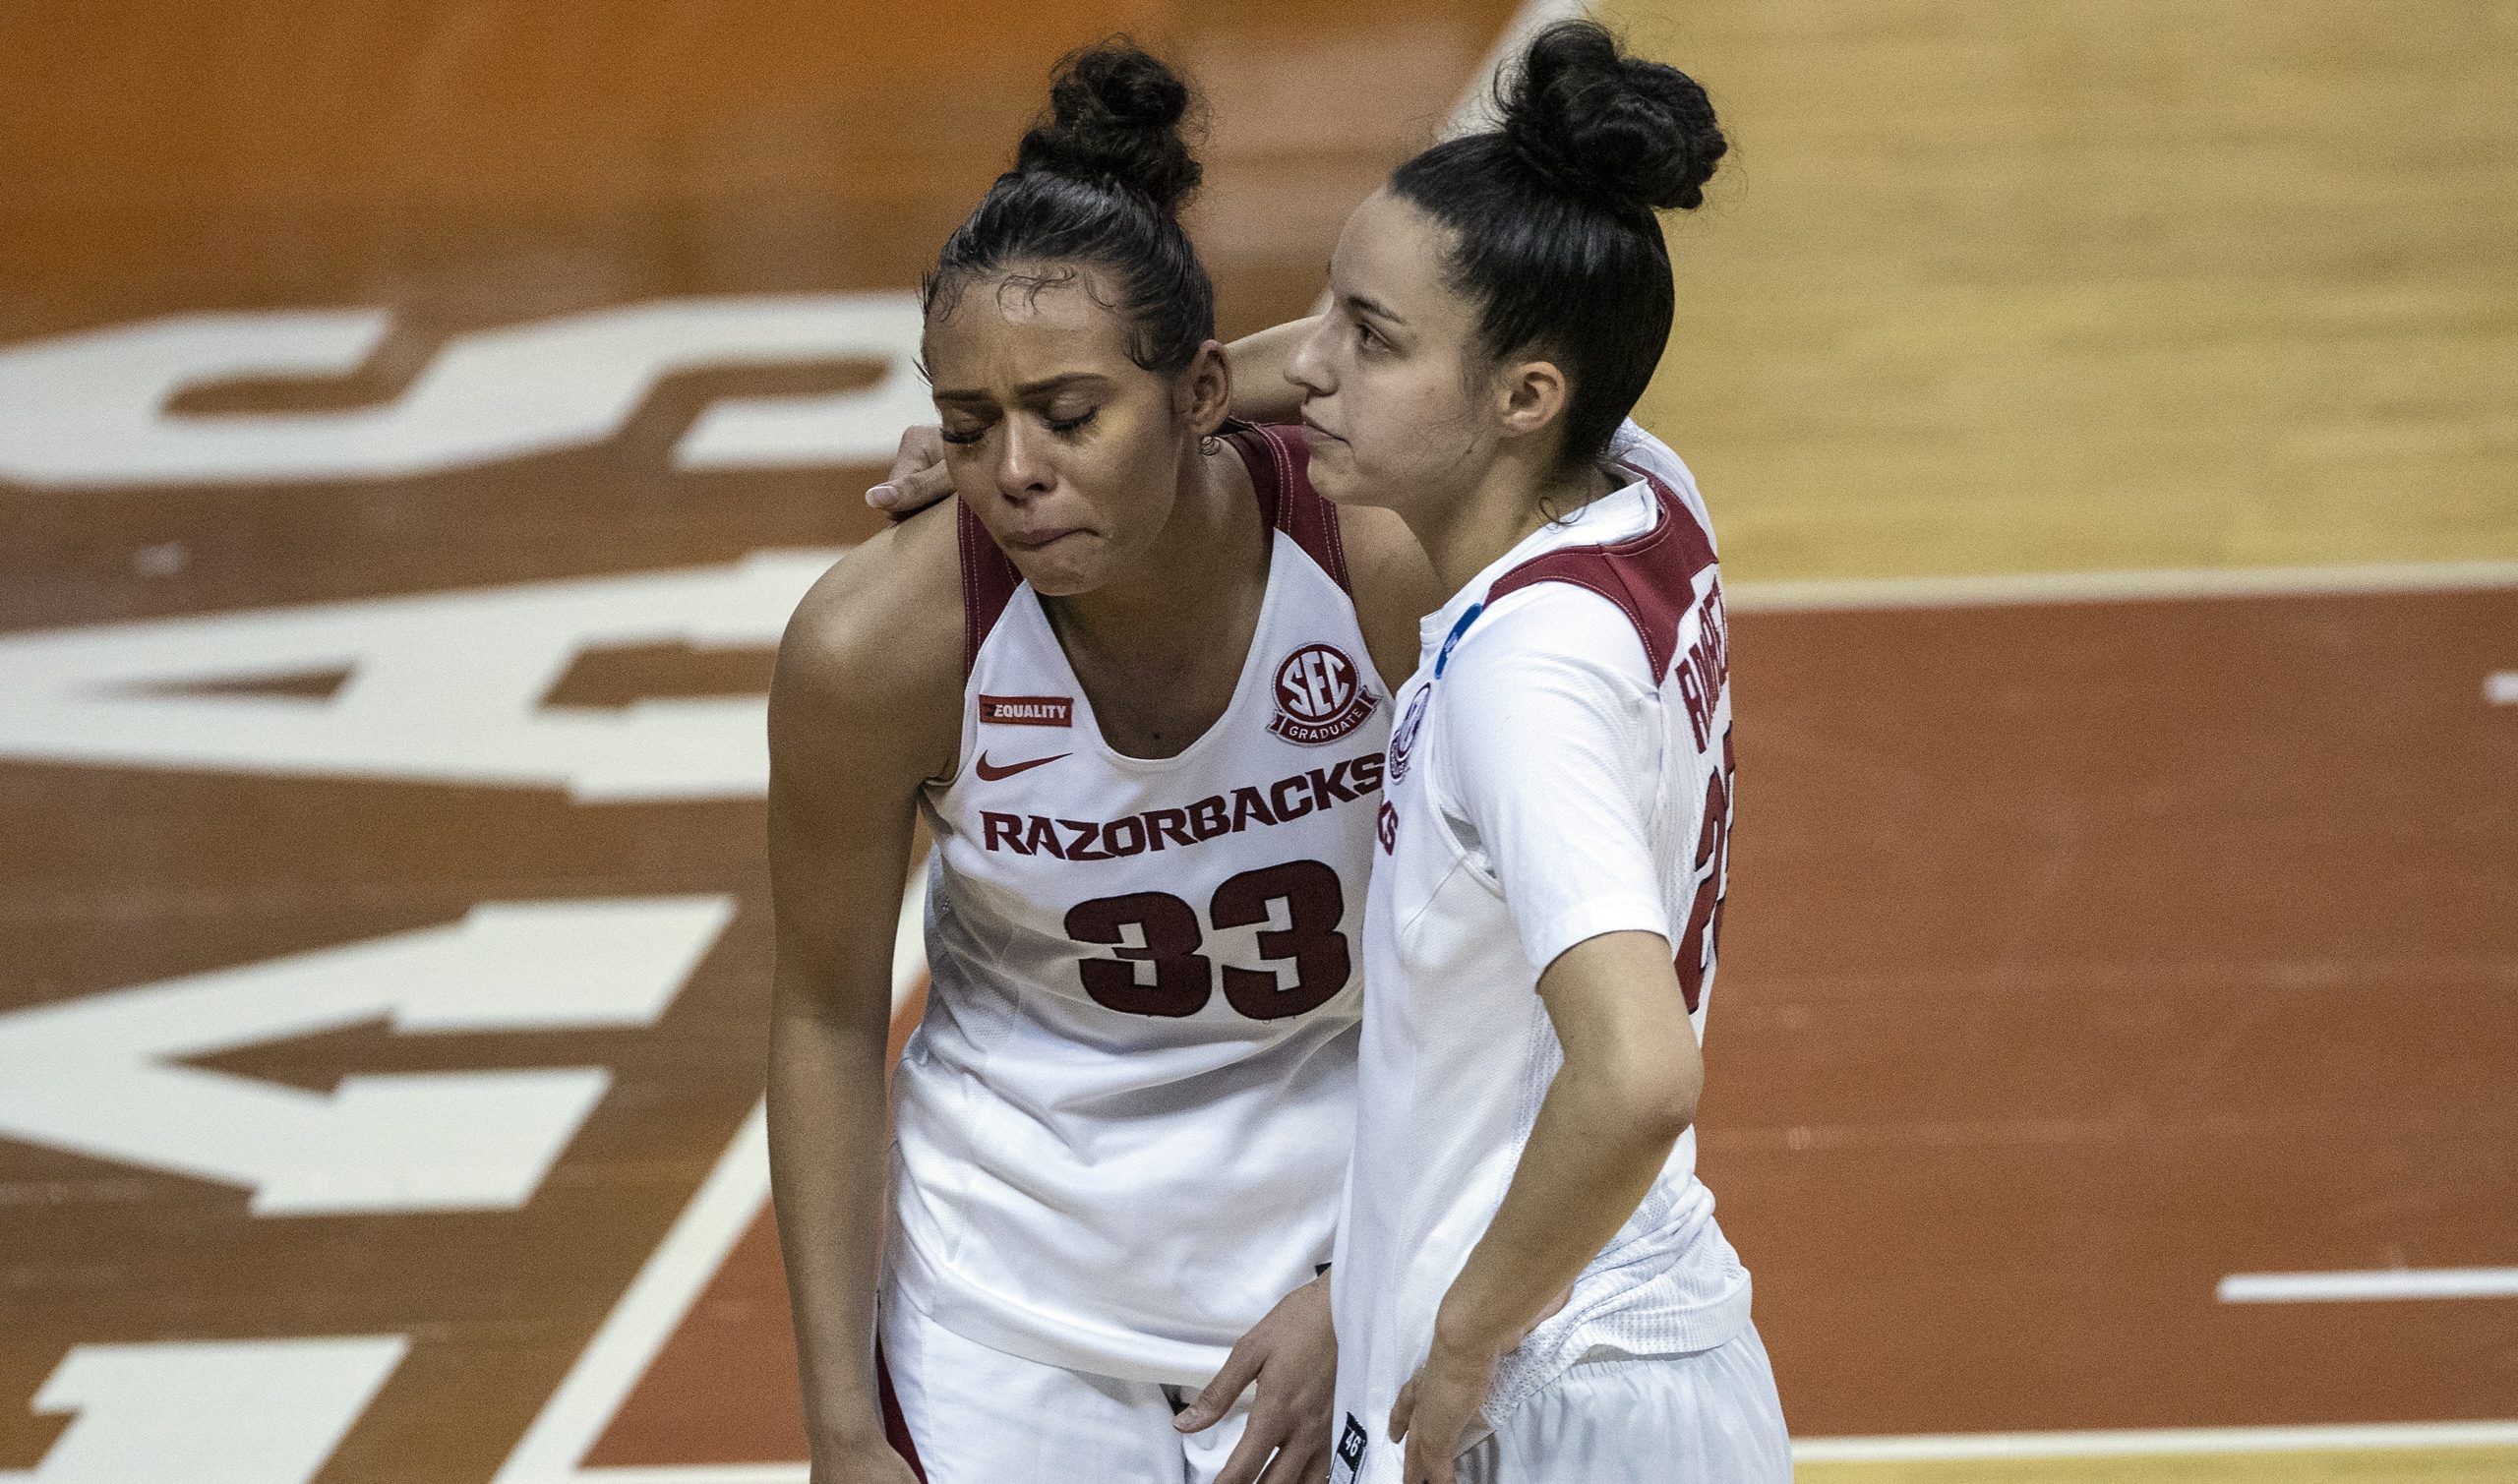 SAN ANTONIO, TX - MARCH 22: {ARKANSAS VS WRIGHT STATE} during the Division I Women’s Basketball Tournament held at Frank Erwin Center on March 22, 2021 in Austin, TX. (Photo by Rudy Gonzalez/NCAA Photos)